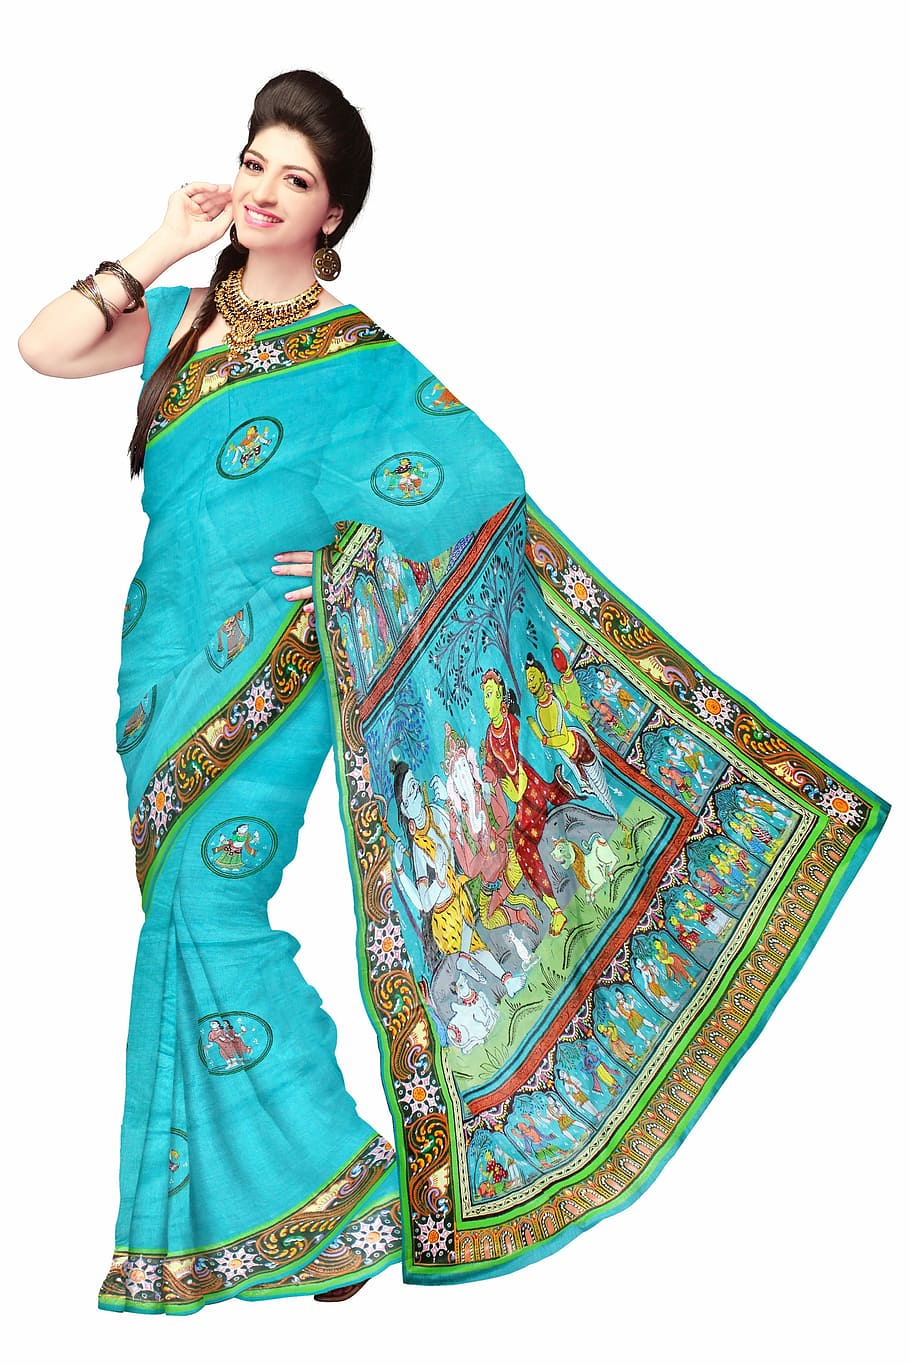 women's blue and multicolored floral sari illustration, Teal